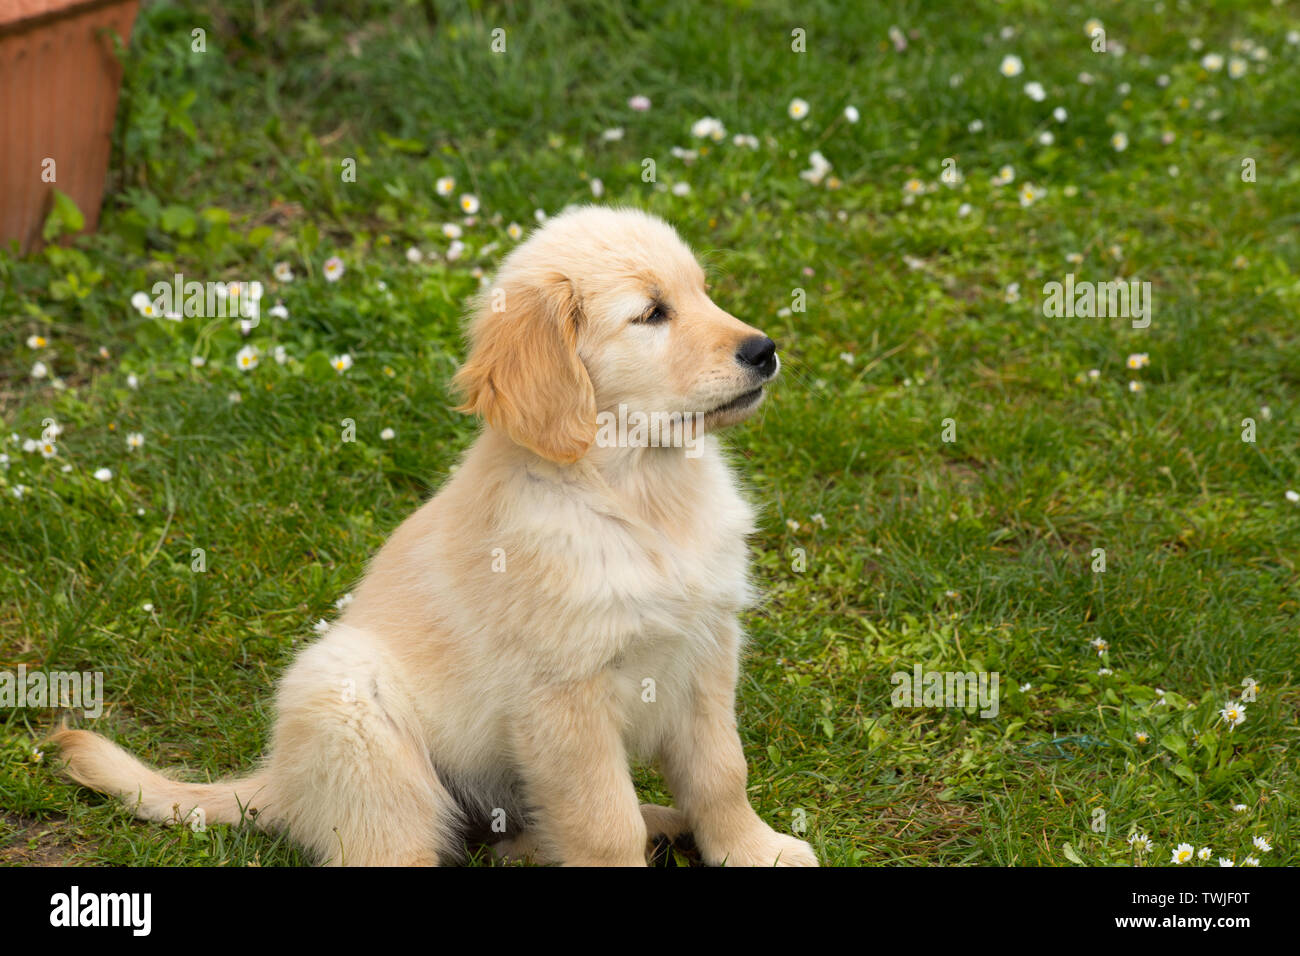 Puppy Dog Of The Golden Retriever Breed A Two Month Old Golden Retriever Dog Stock Photo Alamy